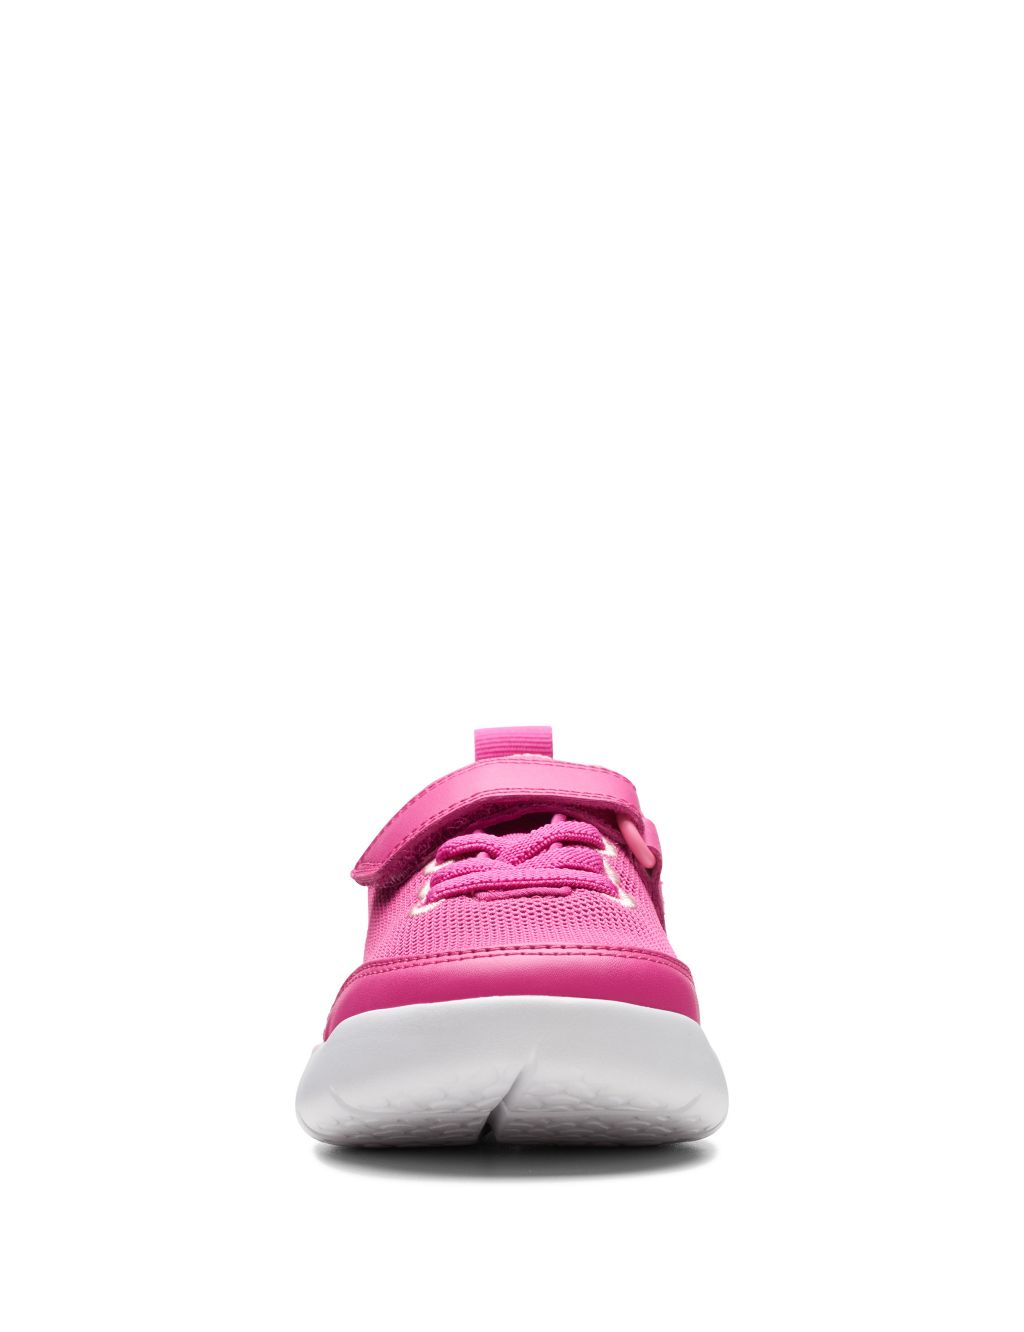 Kids' Riptape Trainers (7 Small - 4 Large) image 4